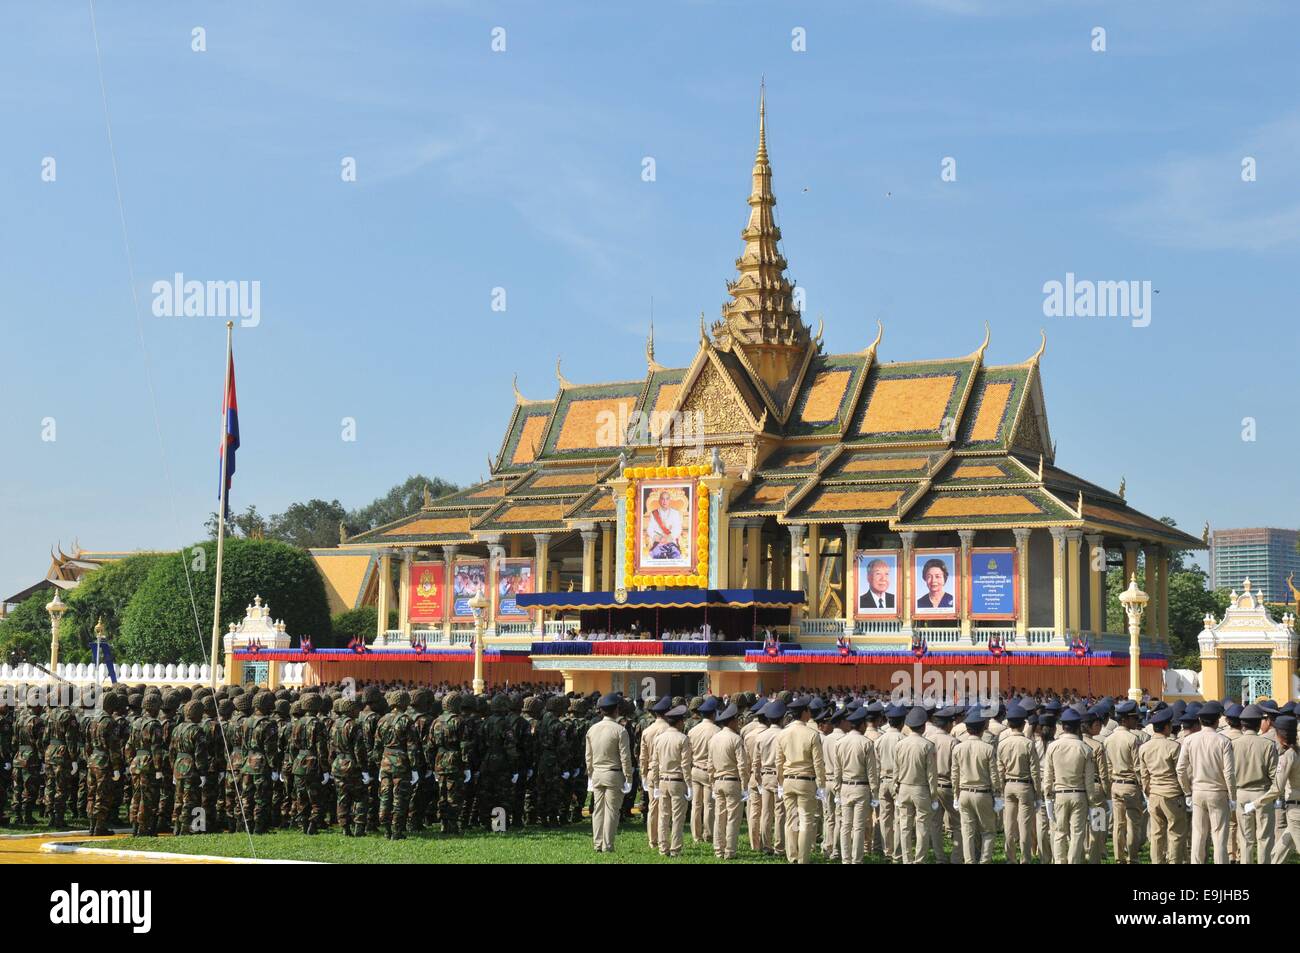 Phnom Penh. 29th Oct, 2014. Soldiers take part in the celebration for the 10th anniversary of Cambodian King Norodom Sihamoni's coronation in Phnom Penh Oct. 29, 2014. Cambodia on Wednesday celebrated the 10th anniversary of King Norodom Sihamoni's coronation, urging people to continue uniting for national peace and development. Credit:  Sovannara/Xinhua/Alamy Live News Stock Photo